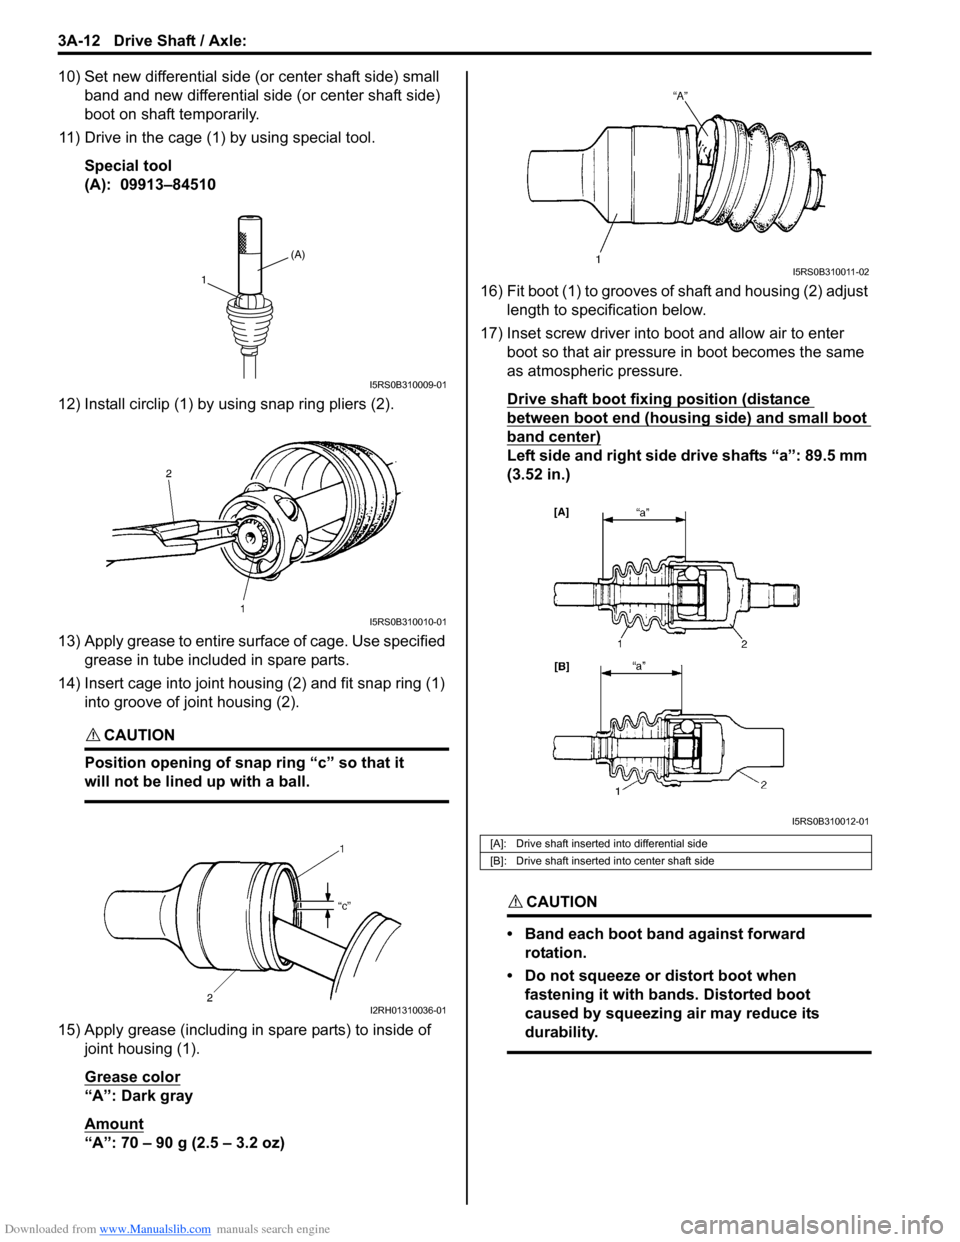 SUZUKI SWIFT 2006 2.G Service Workshop Manual Downloaded from www.Manualslib.com manuals search engine 3A-12 Drive Shaft / Axle: 
10) Set new differential side (or center shaft side) small band and new differential side (or center shaft side) 
bo